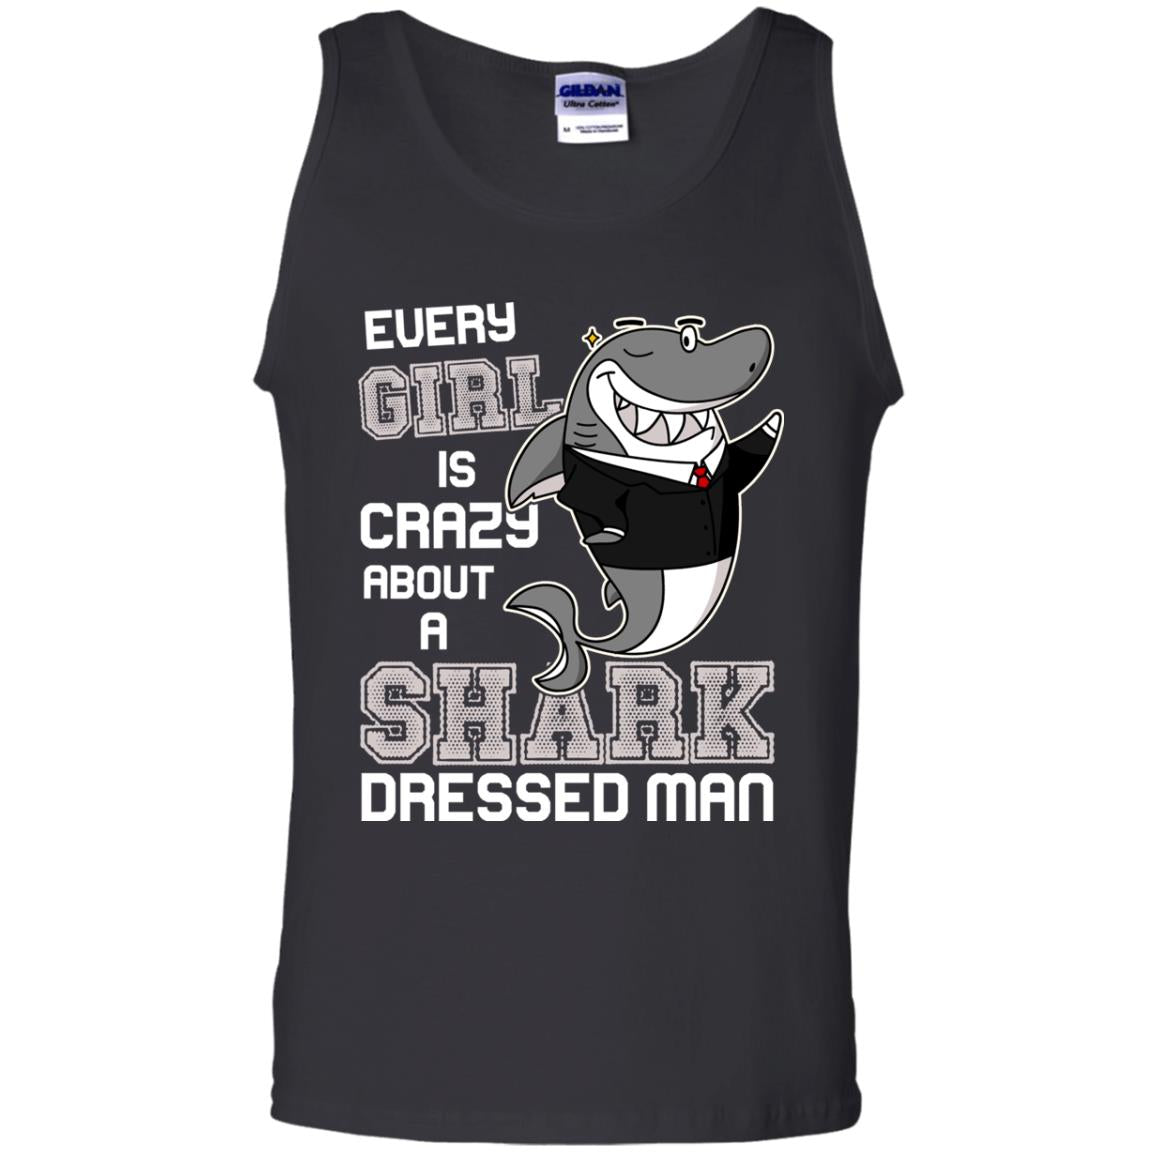 Every Girl Is Crazy About A Shark Dressed ManG220 Gildan 100% Cotton Tank Top